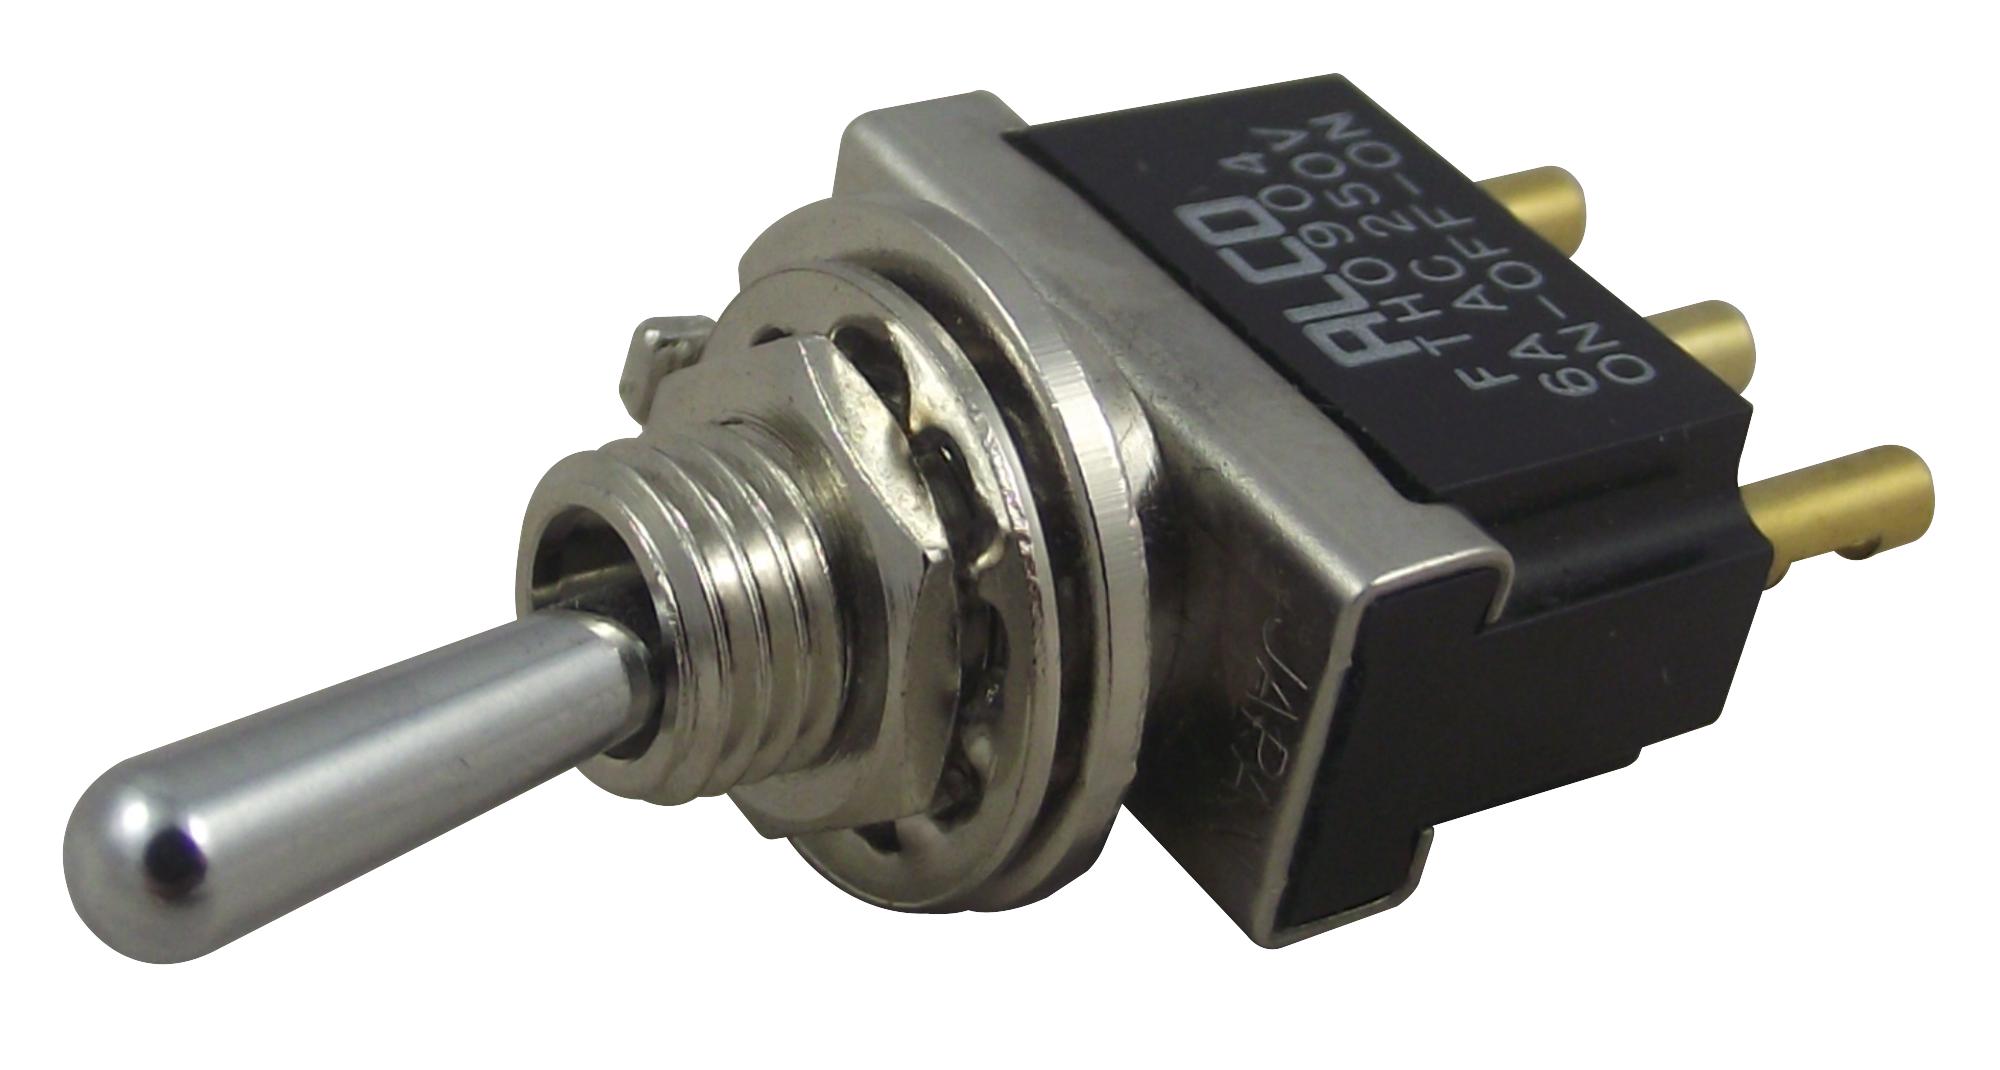 4-6437630-8 TOGGLE SWITCH, SPDT, 6A, 250V ALCOSWITCH - TE CONNECTIVITY